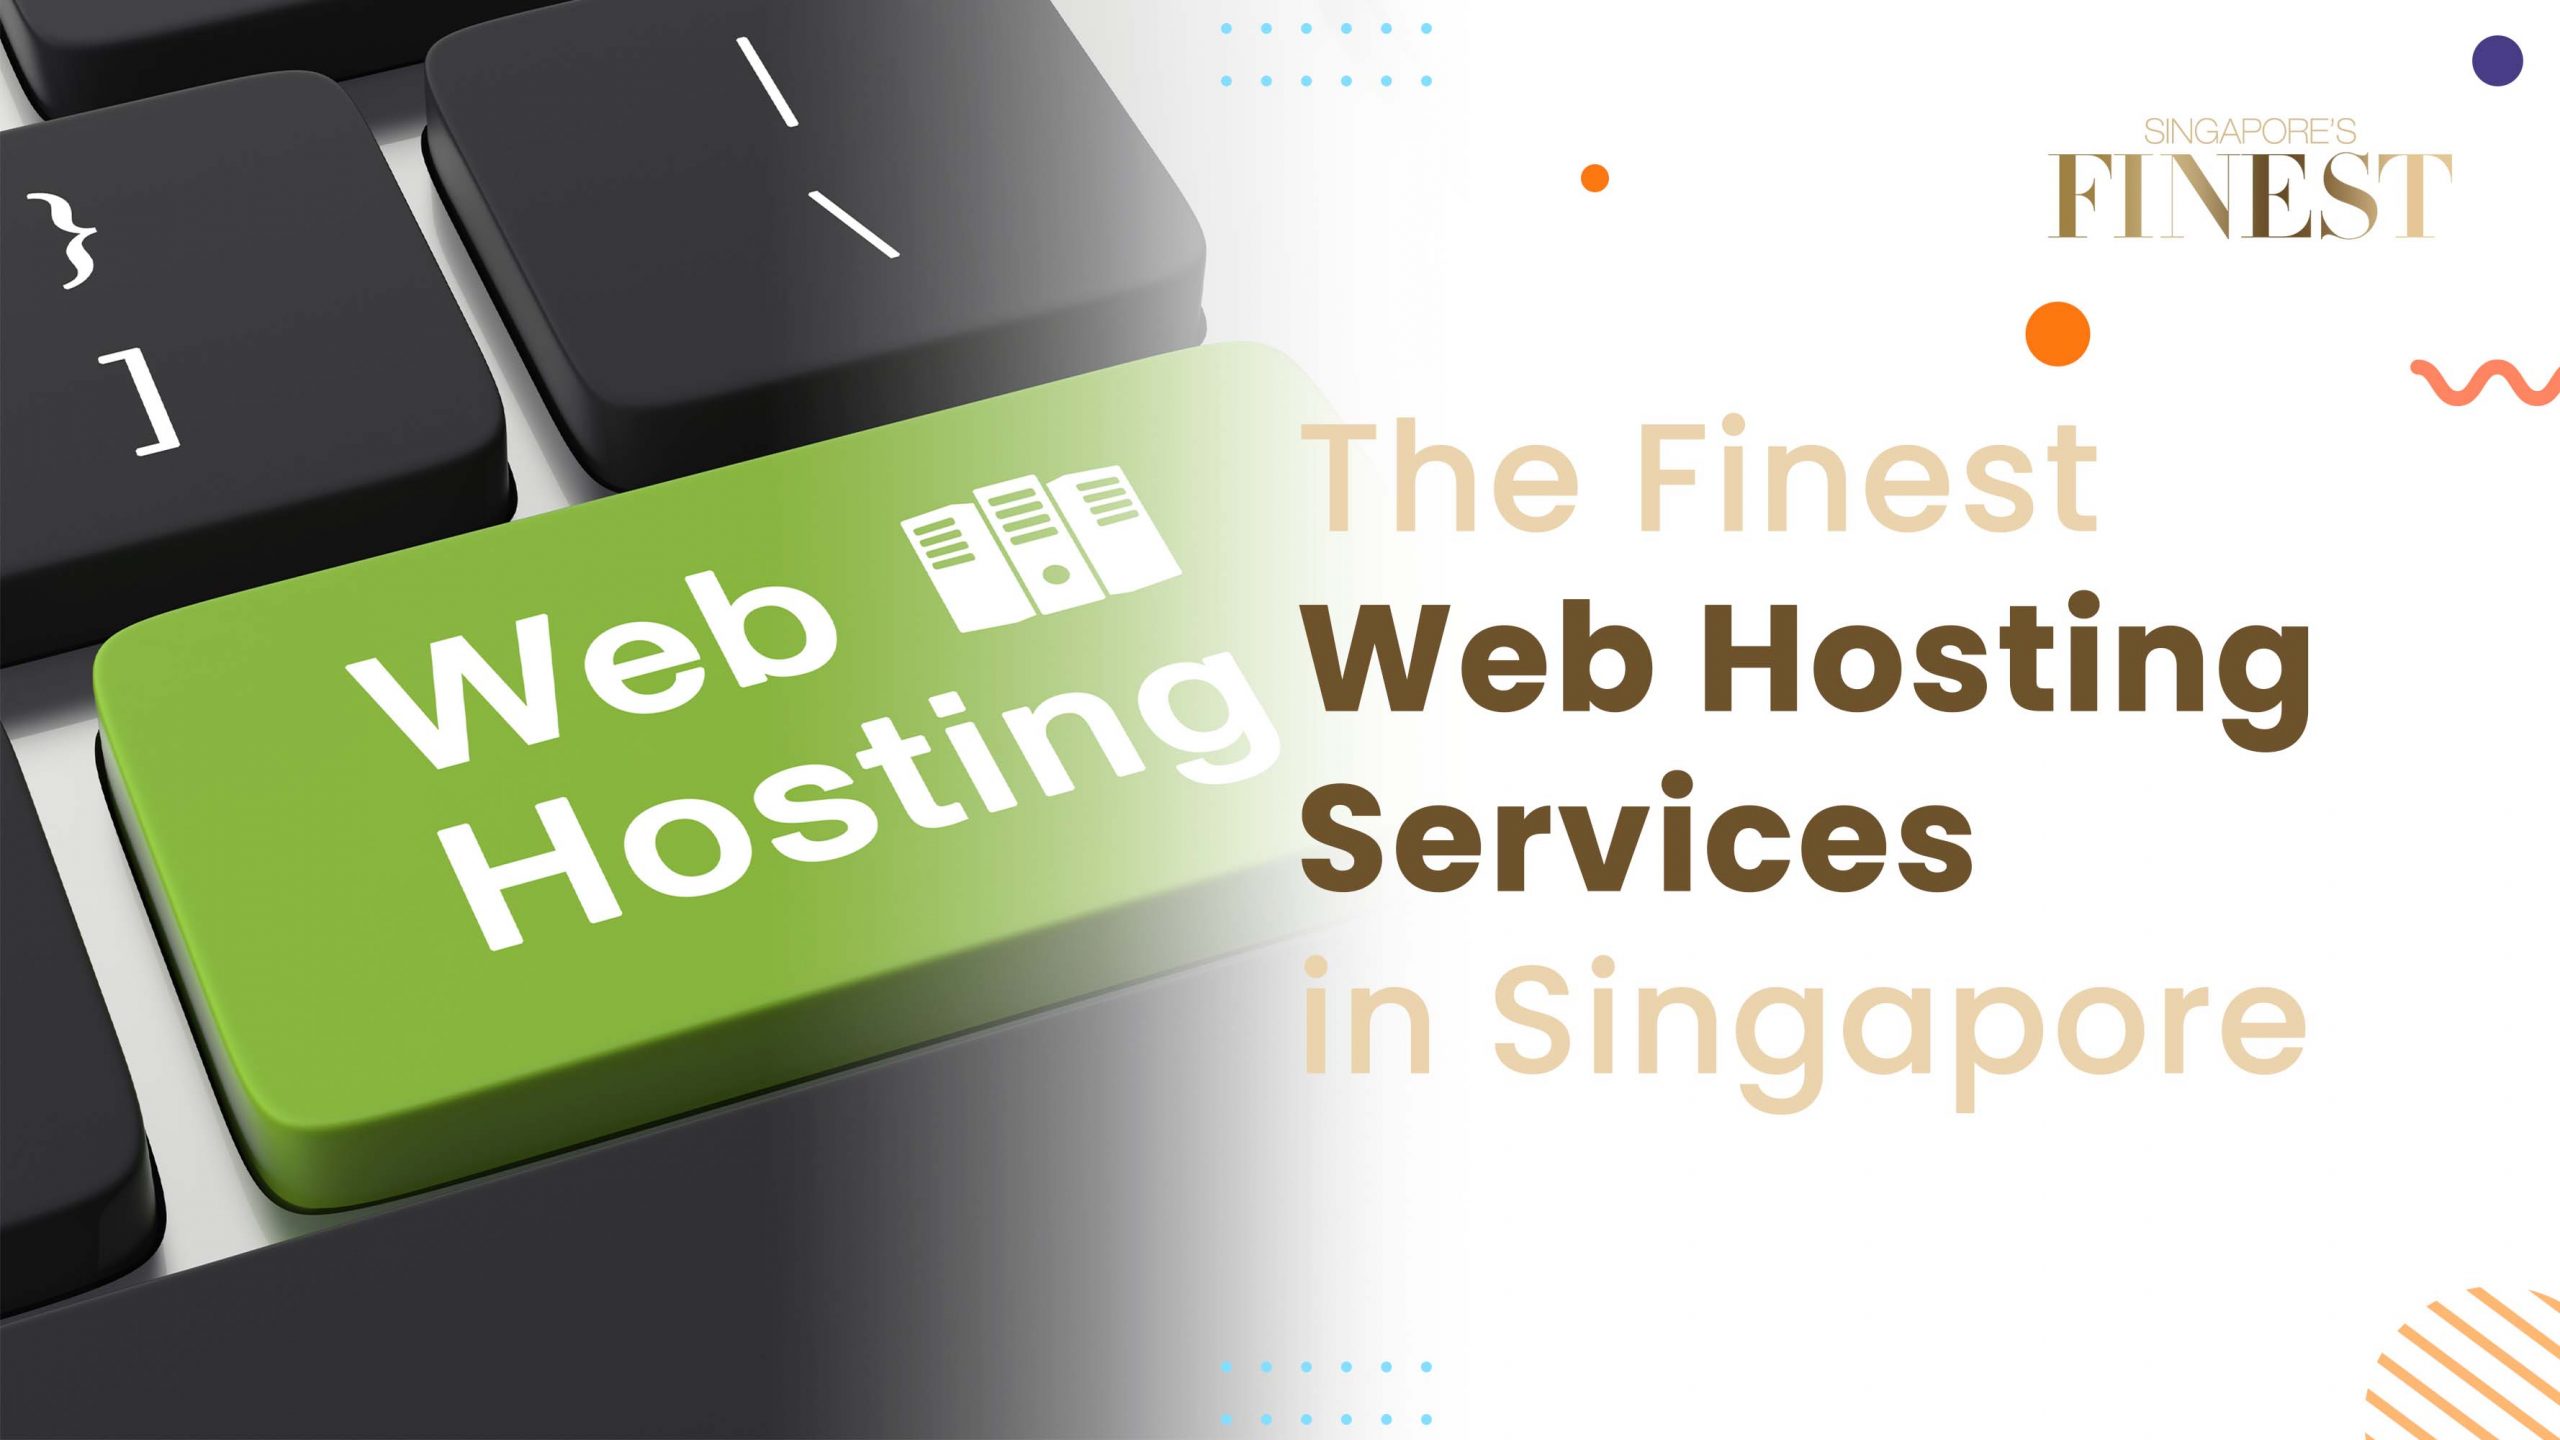 Finest Web Hosting Services in Singapore